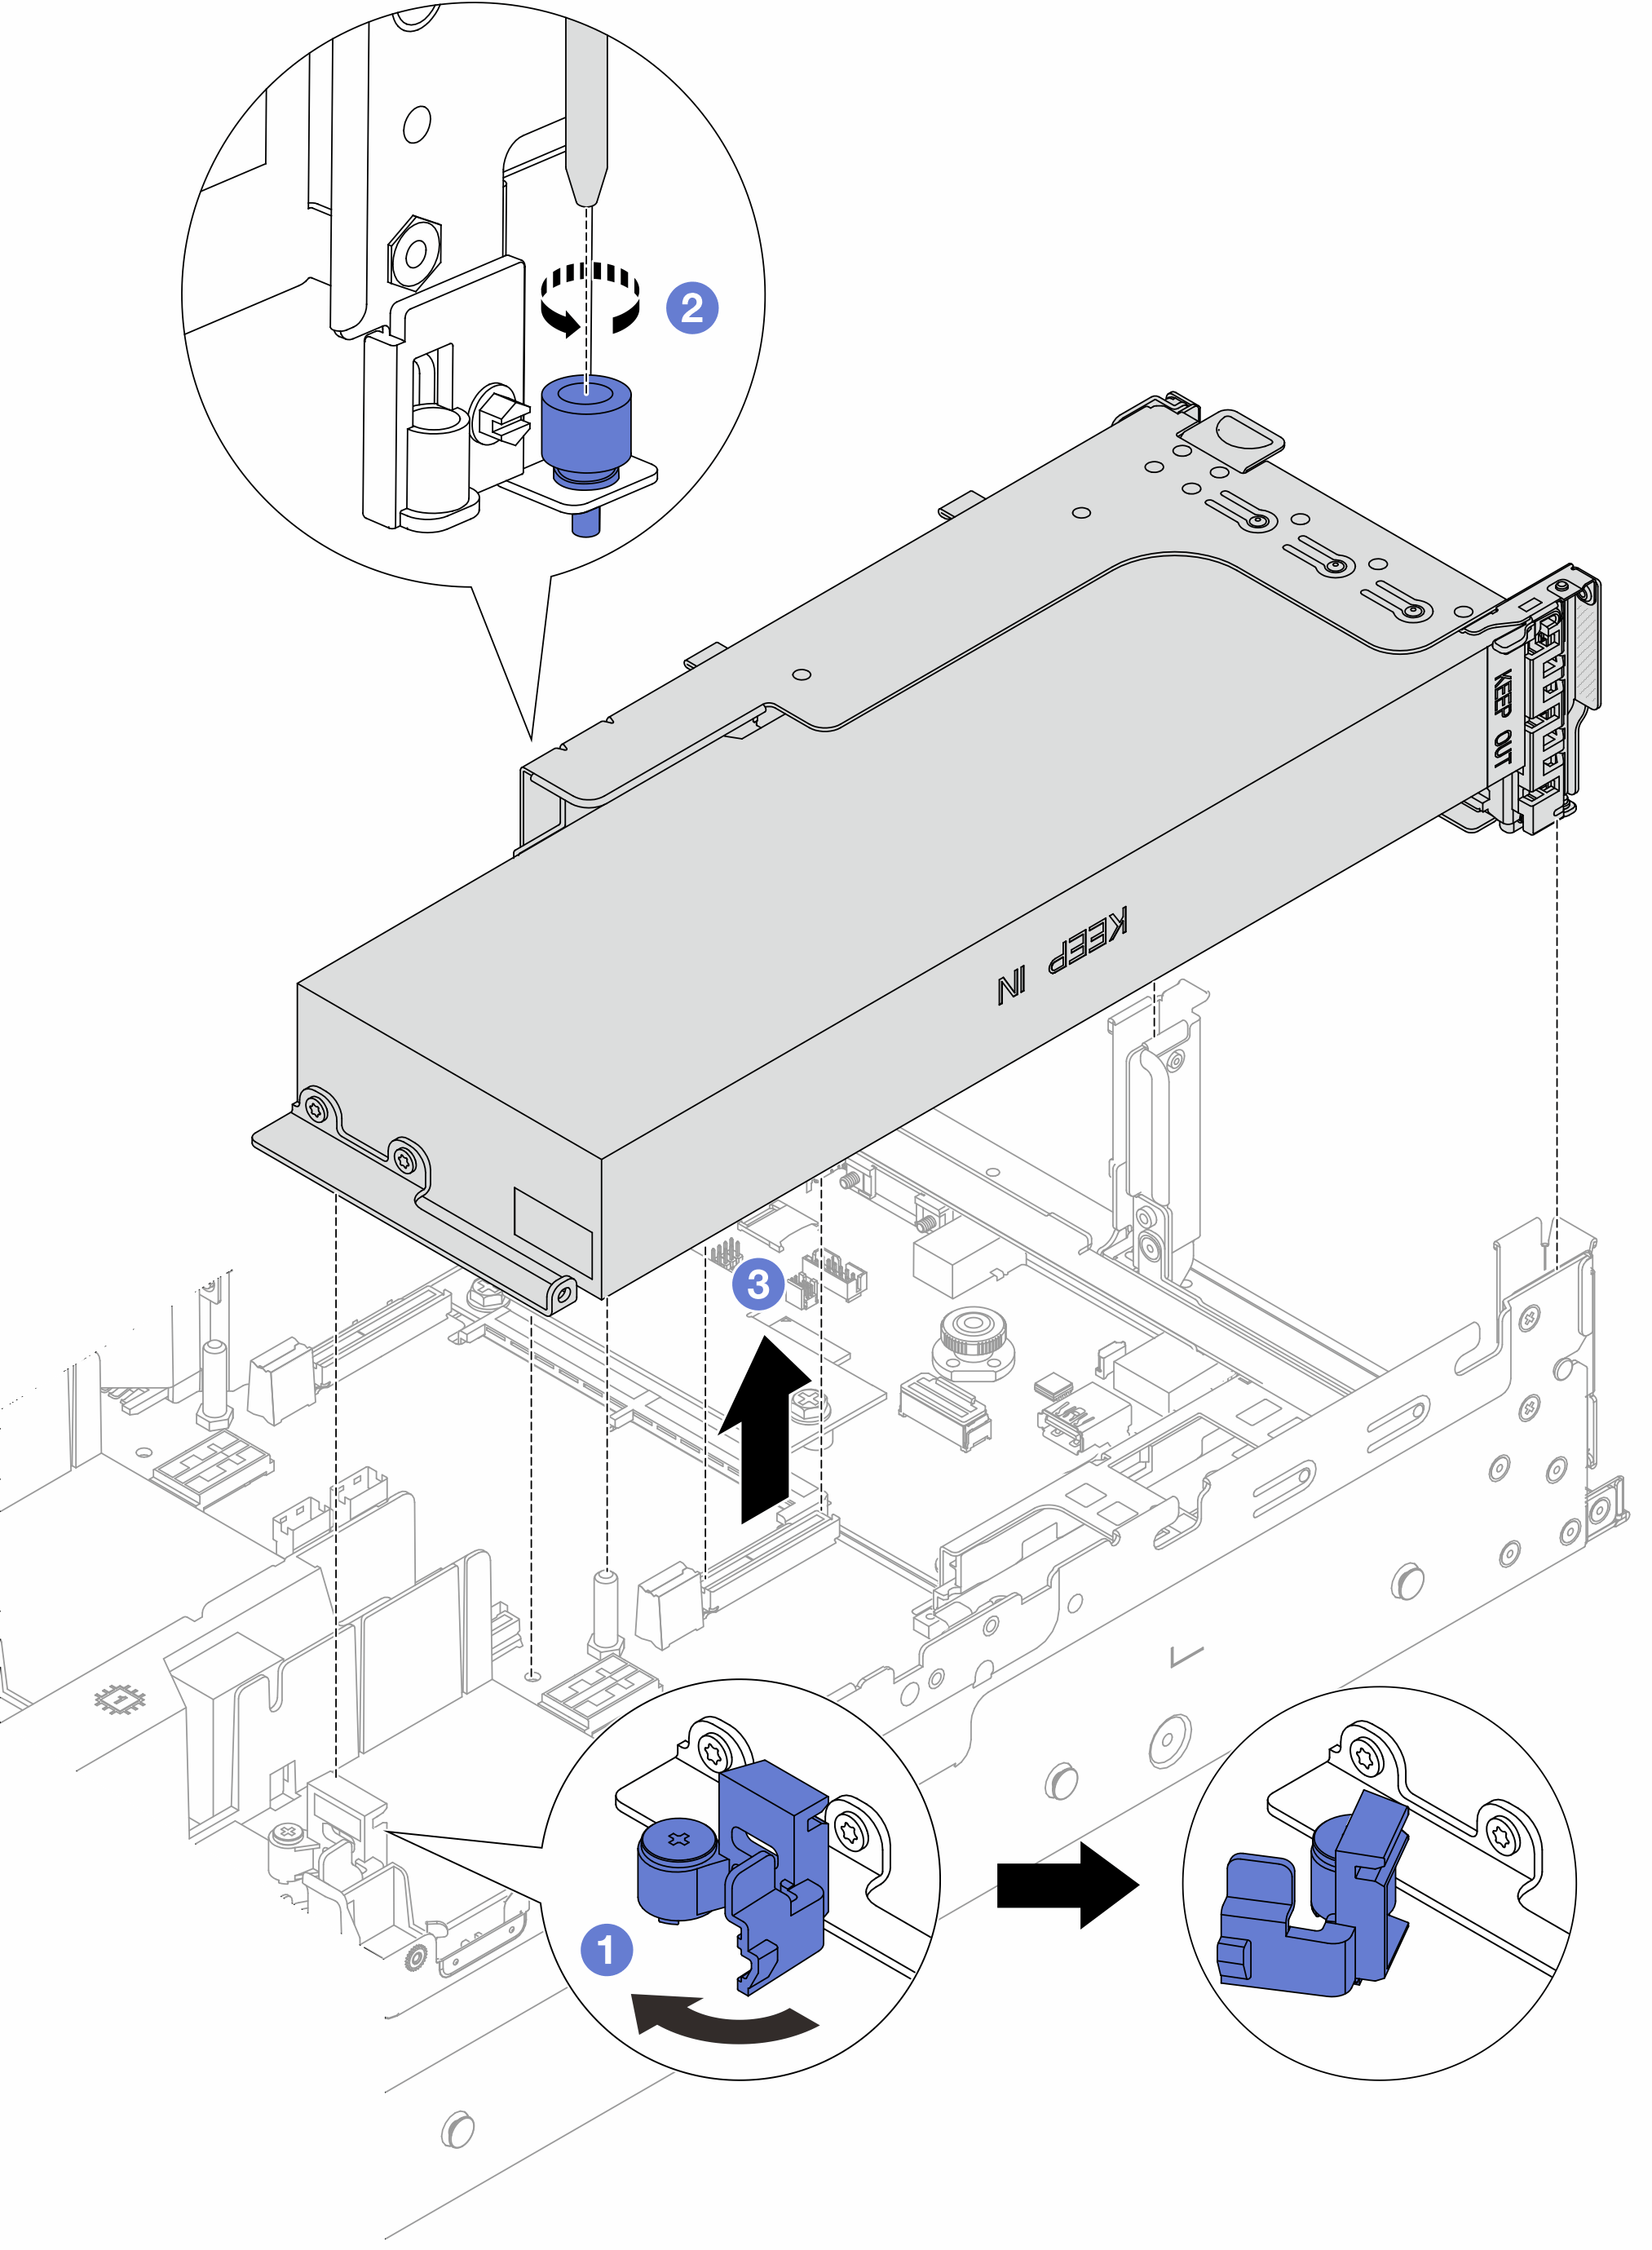 Removing the riser 1 assembly with GPU adapter